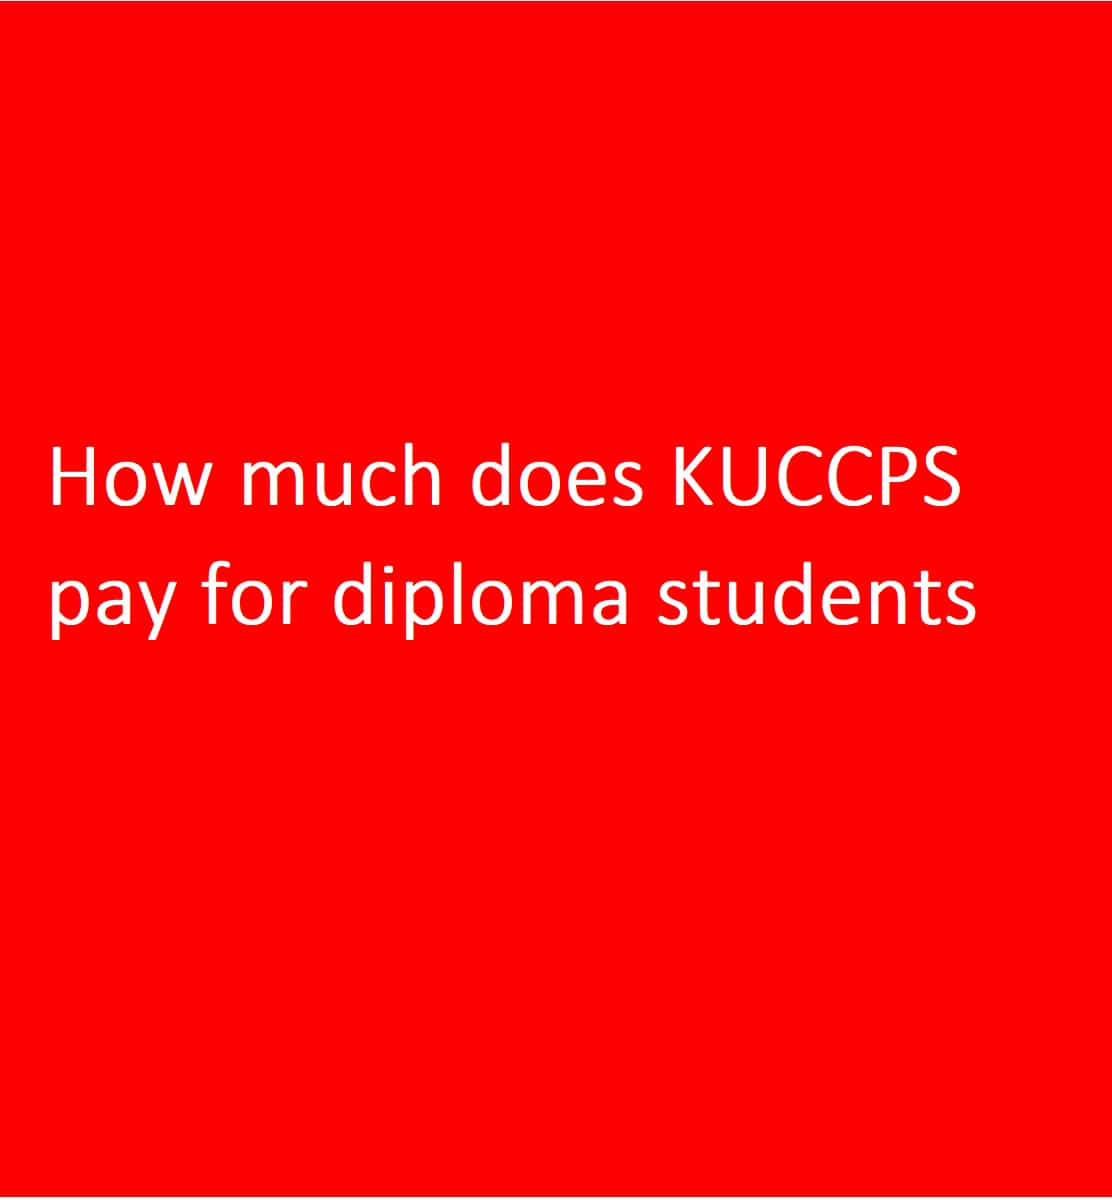 How much does KUCCPS pay for diploma students